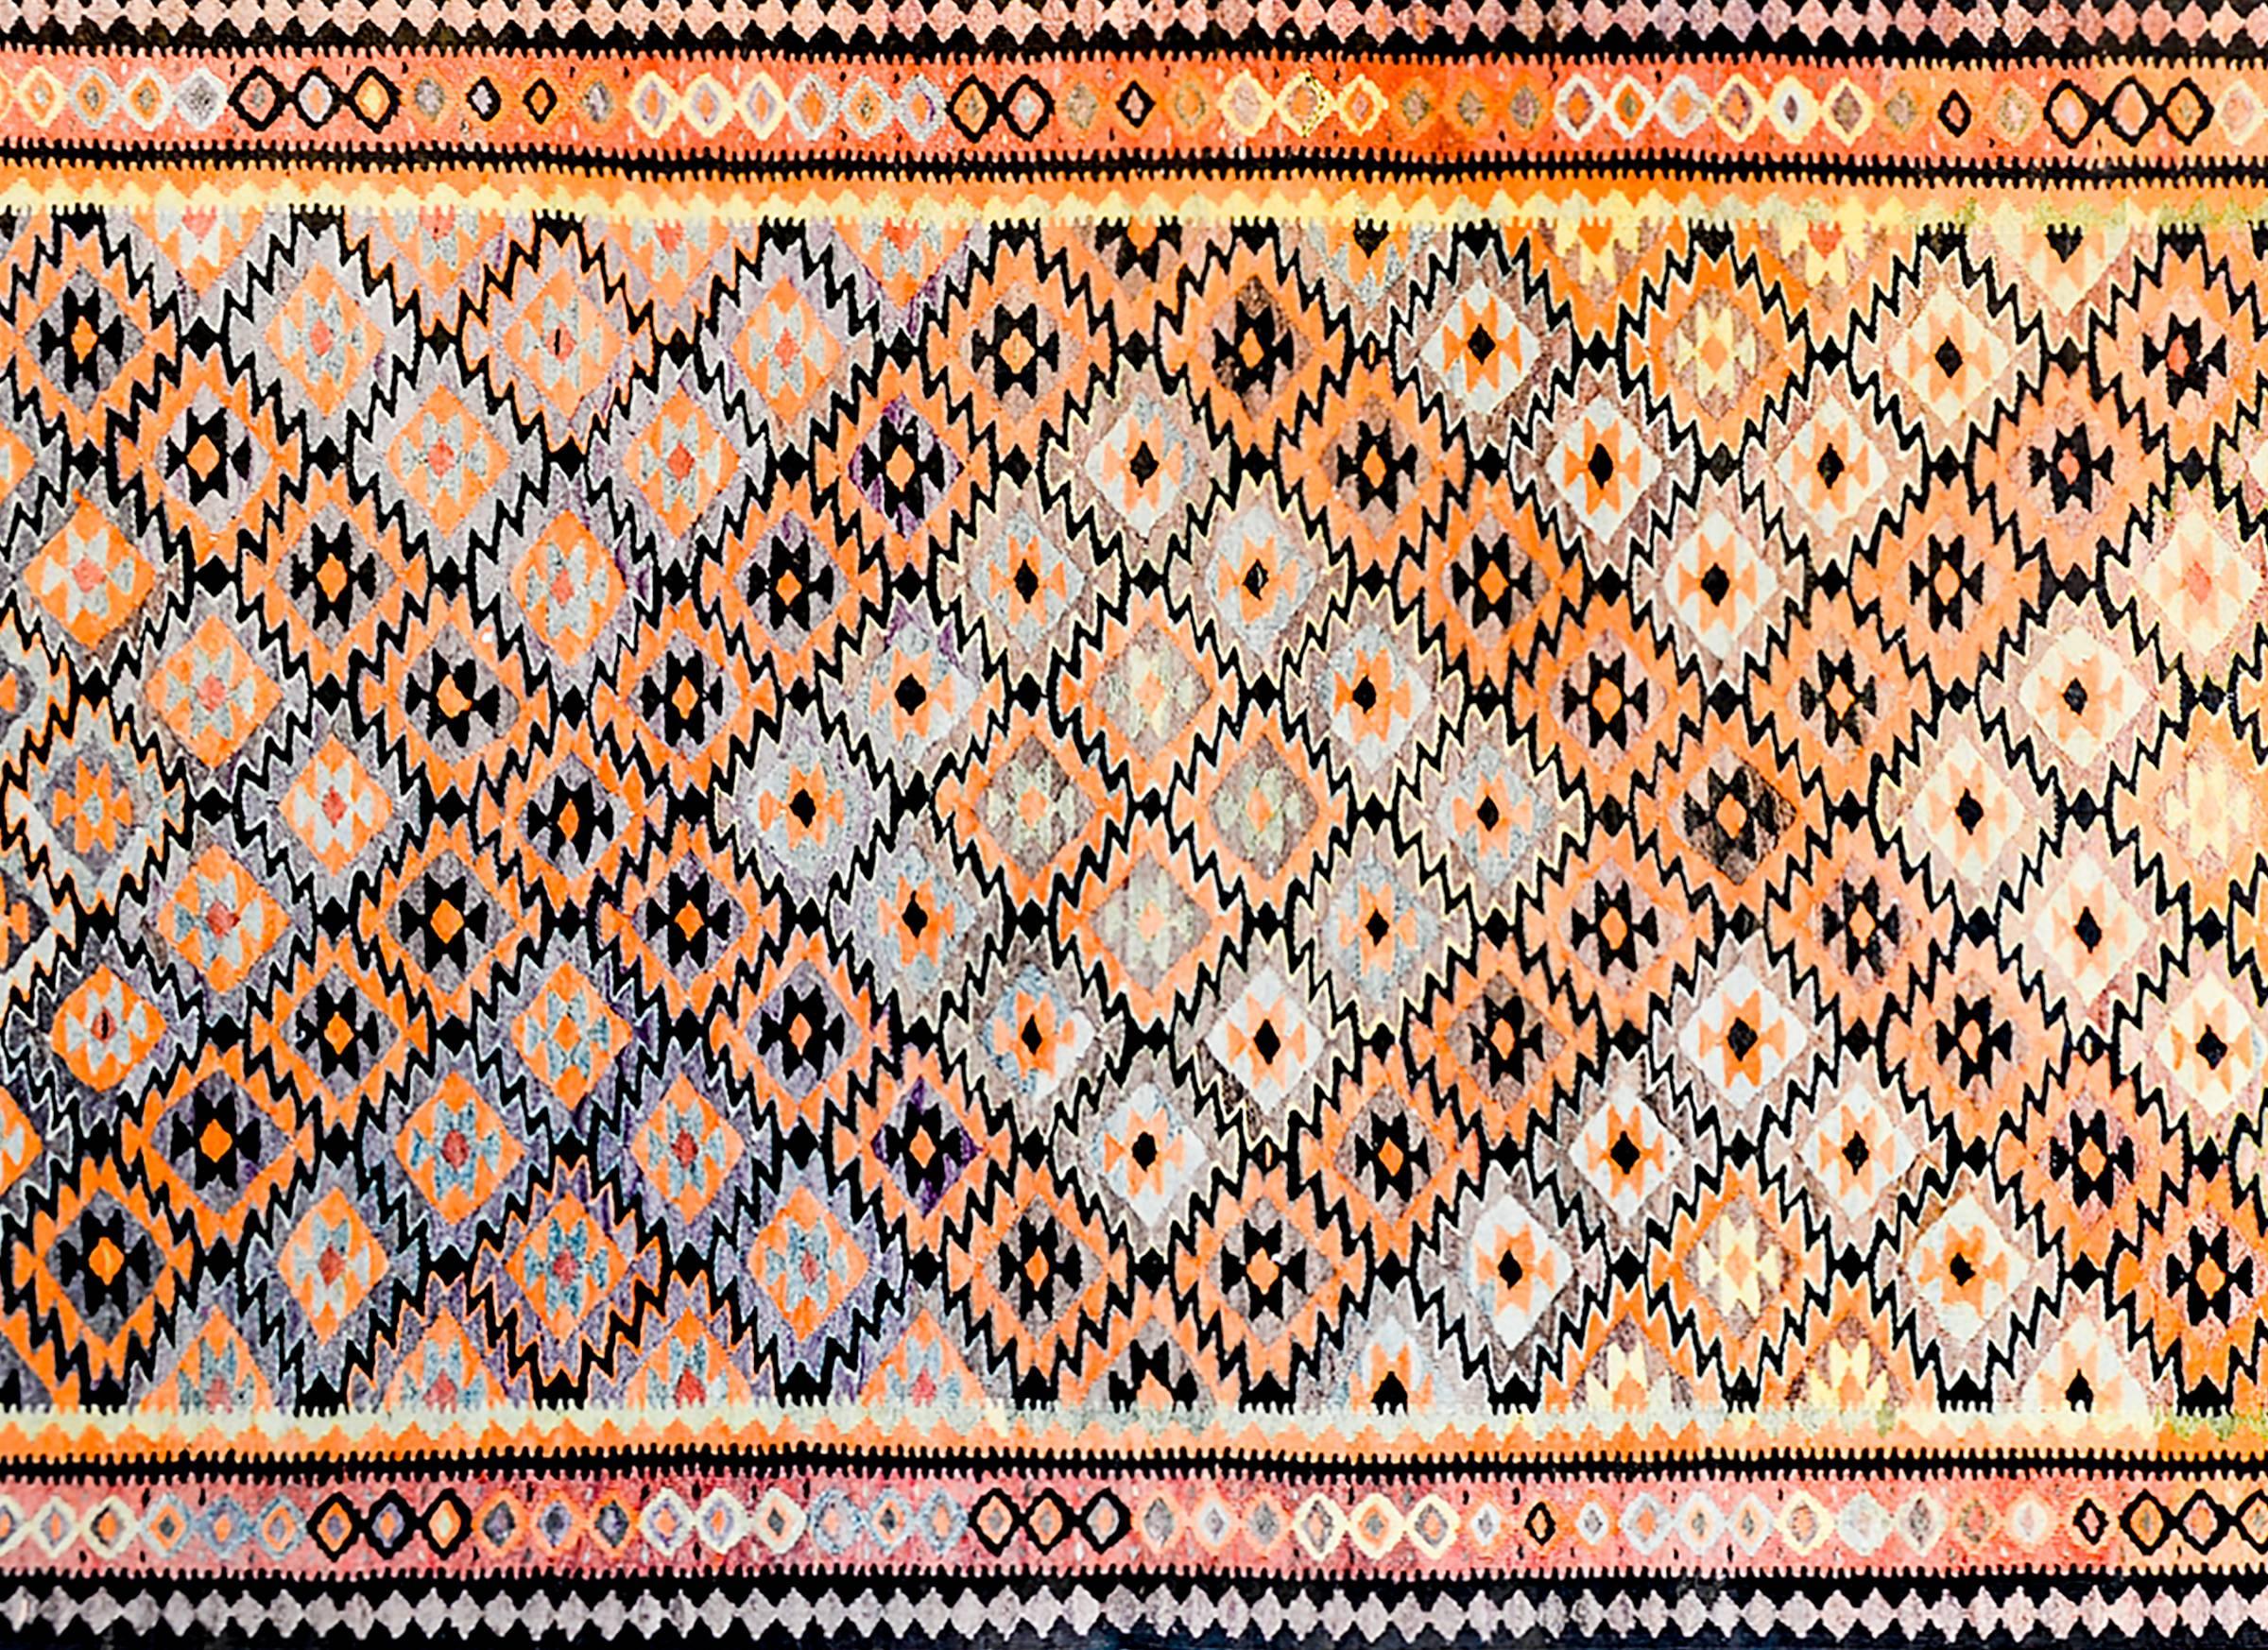 An amazing mid-20th century Persian Qazvin Kilim rug with an multi-colored diamond pattern woven in such a way that a larger diamond pattern of orange, lilac, back and natural wool colored diamonds is created. The border is complex, with three